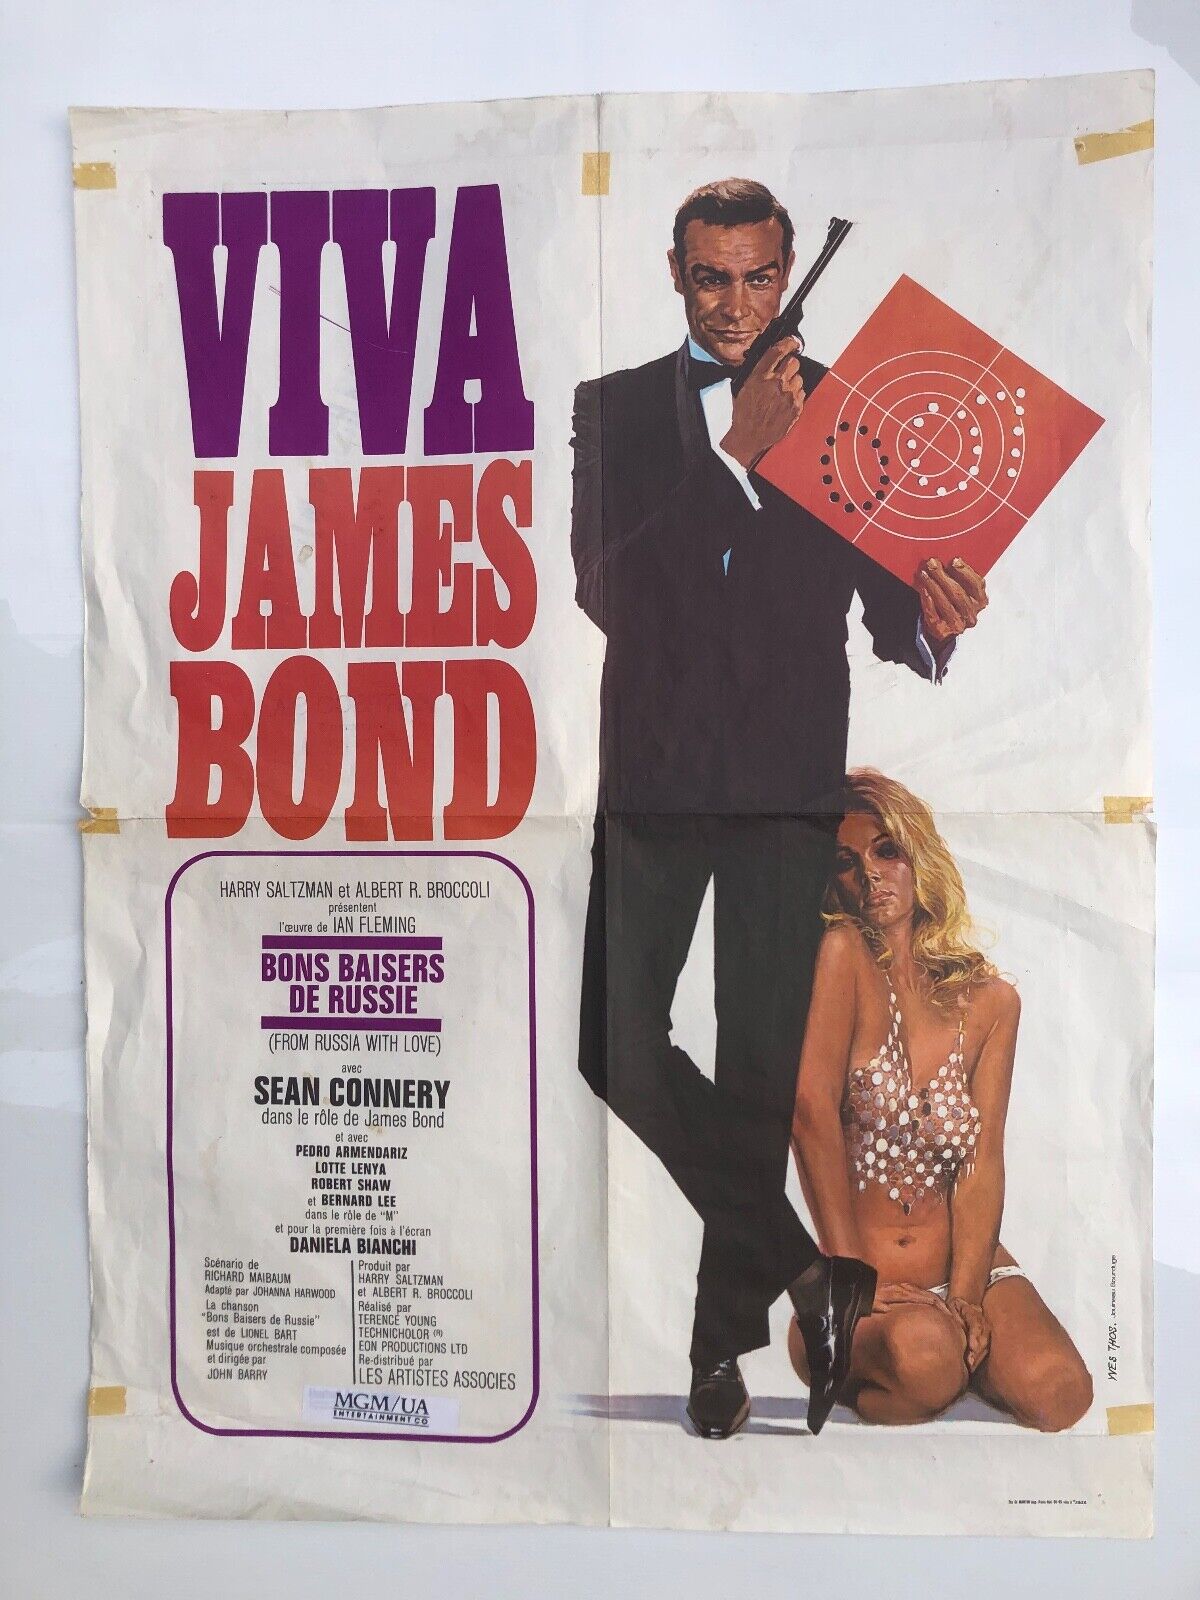 Viva James Bond Over item Seasonal Wrap Introduction handling From with love Russia